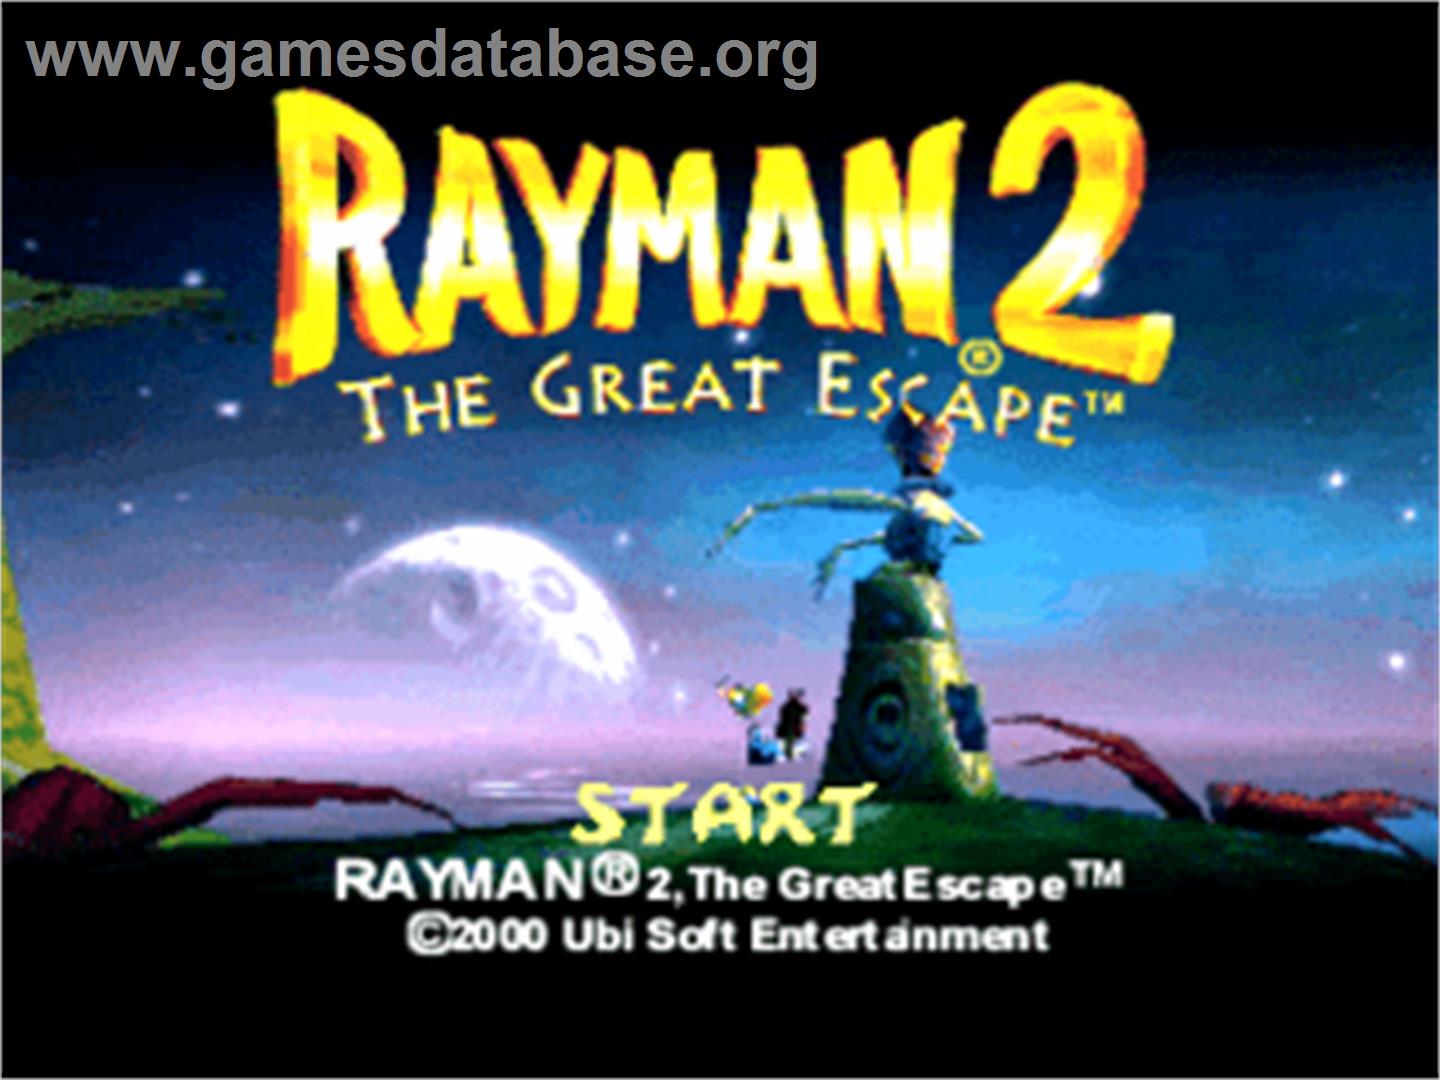 Rayman 2: The Great Escape - Sony Playstation - Artwork - Title Screen